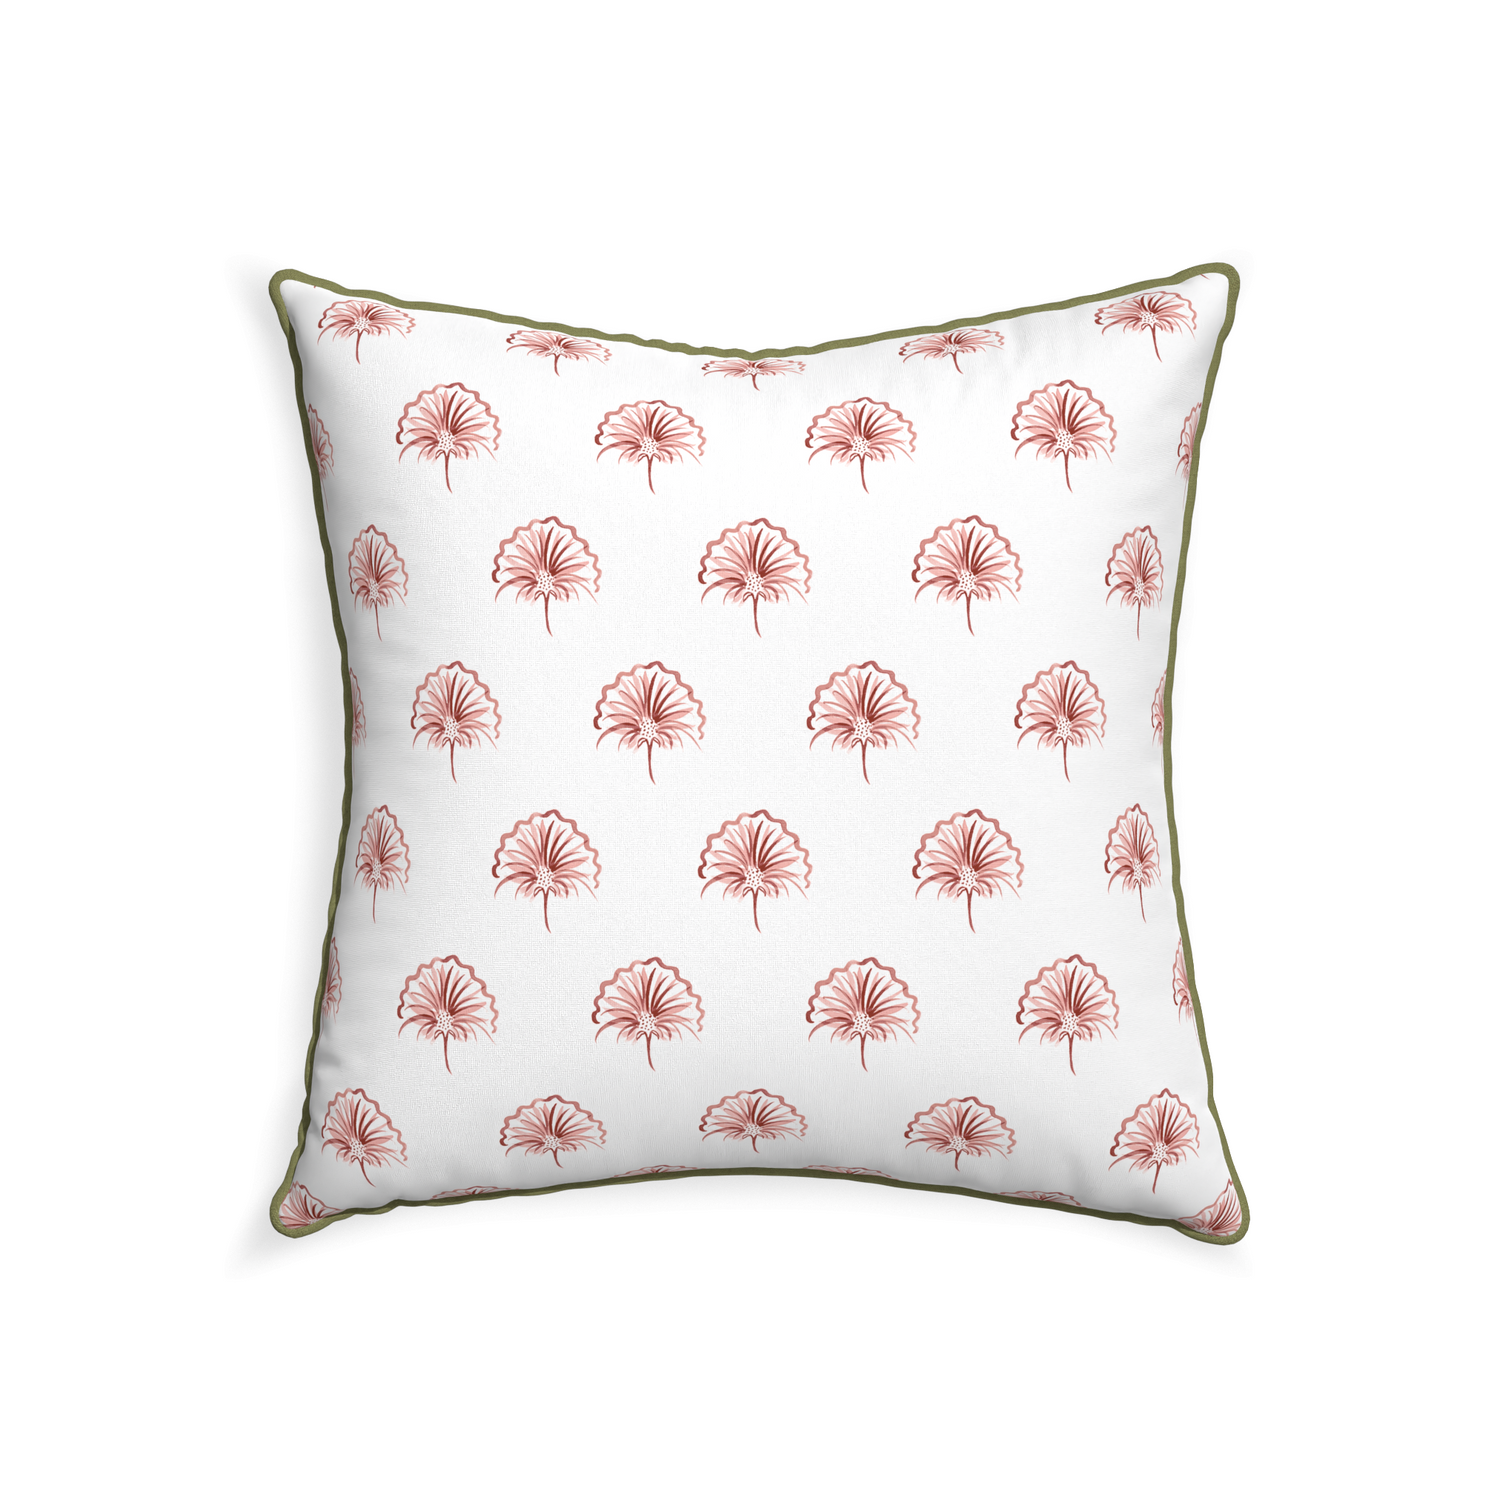 22-square penelope rose custom pillow with moss piping on white background